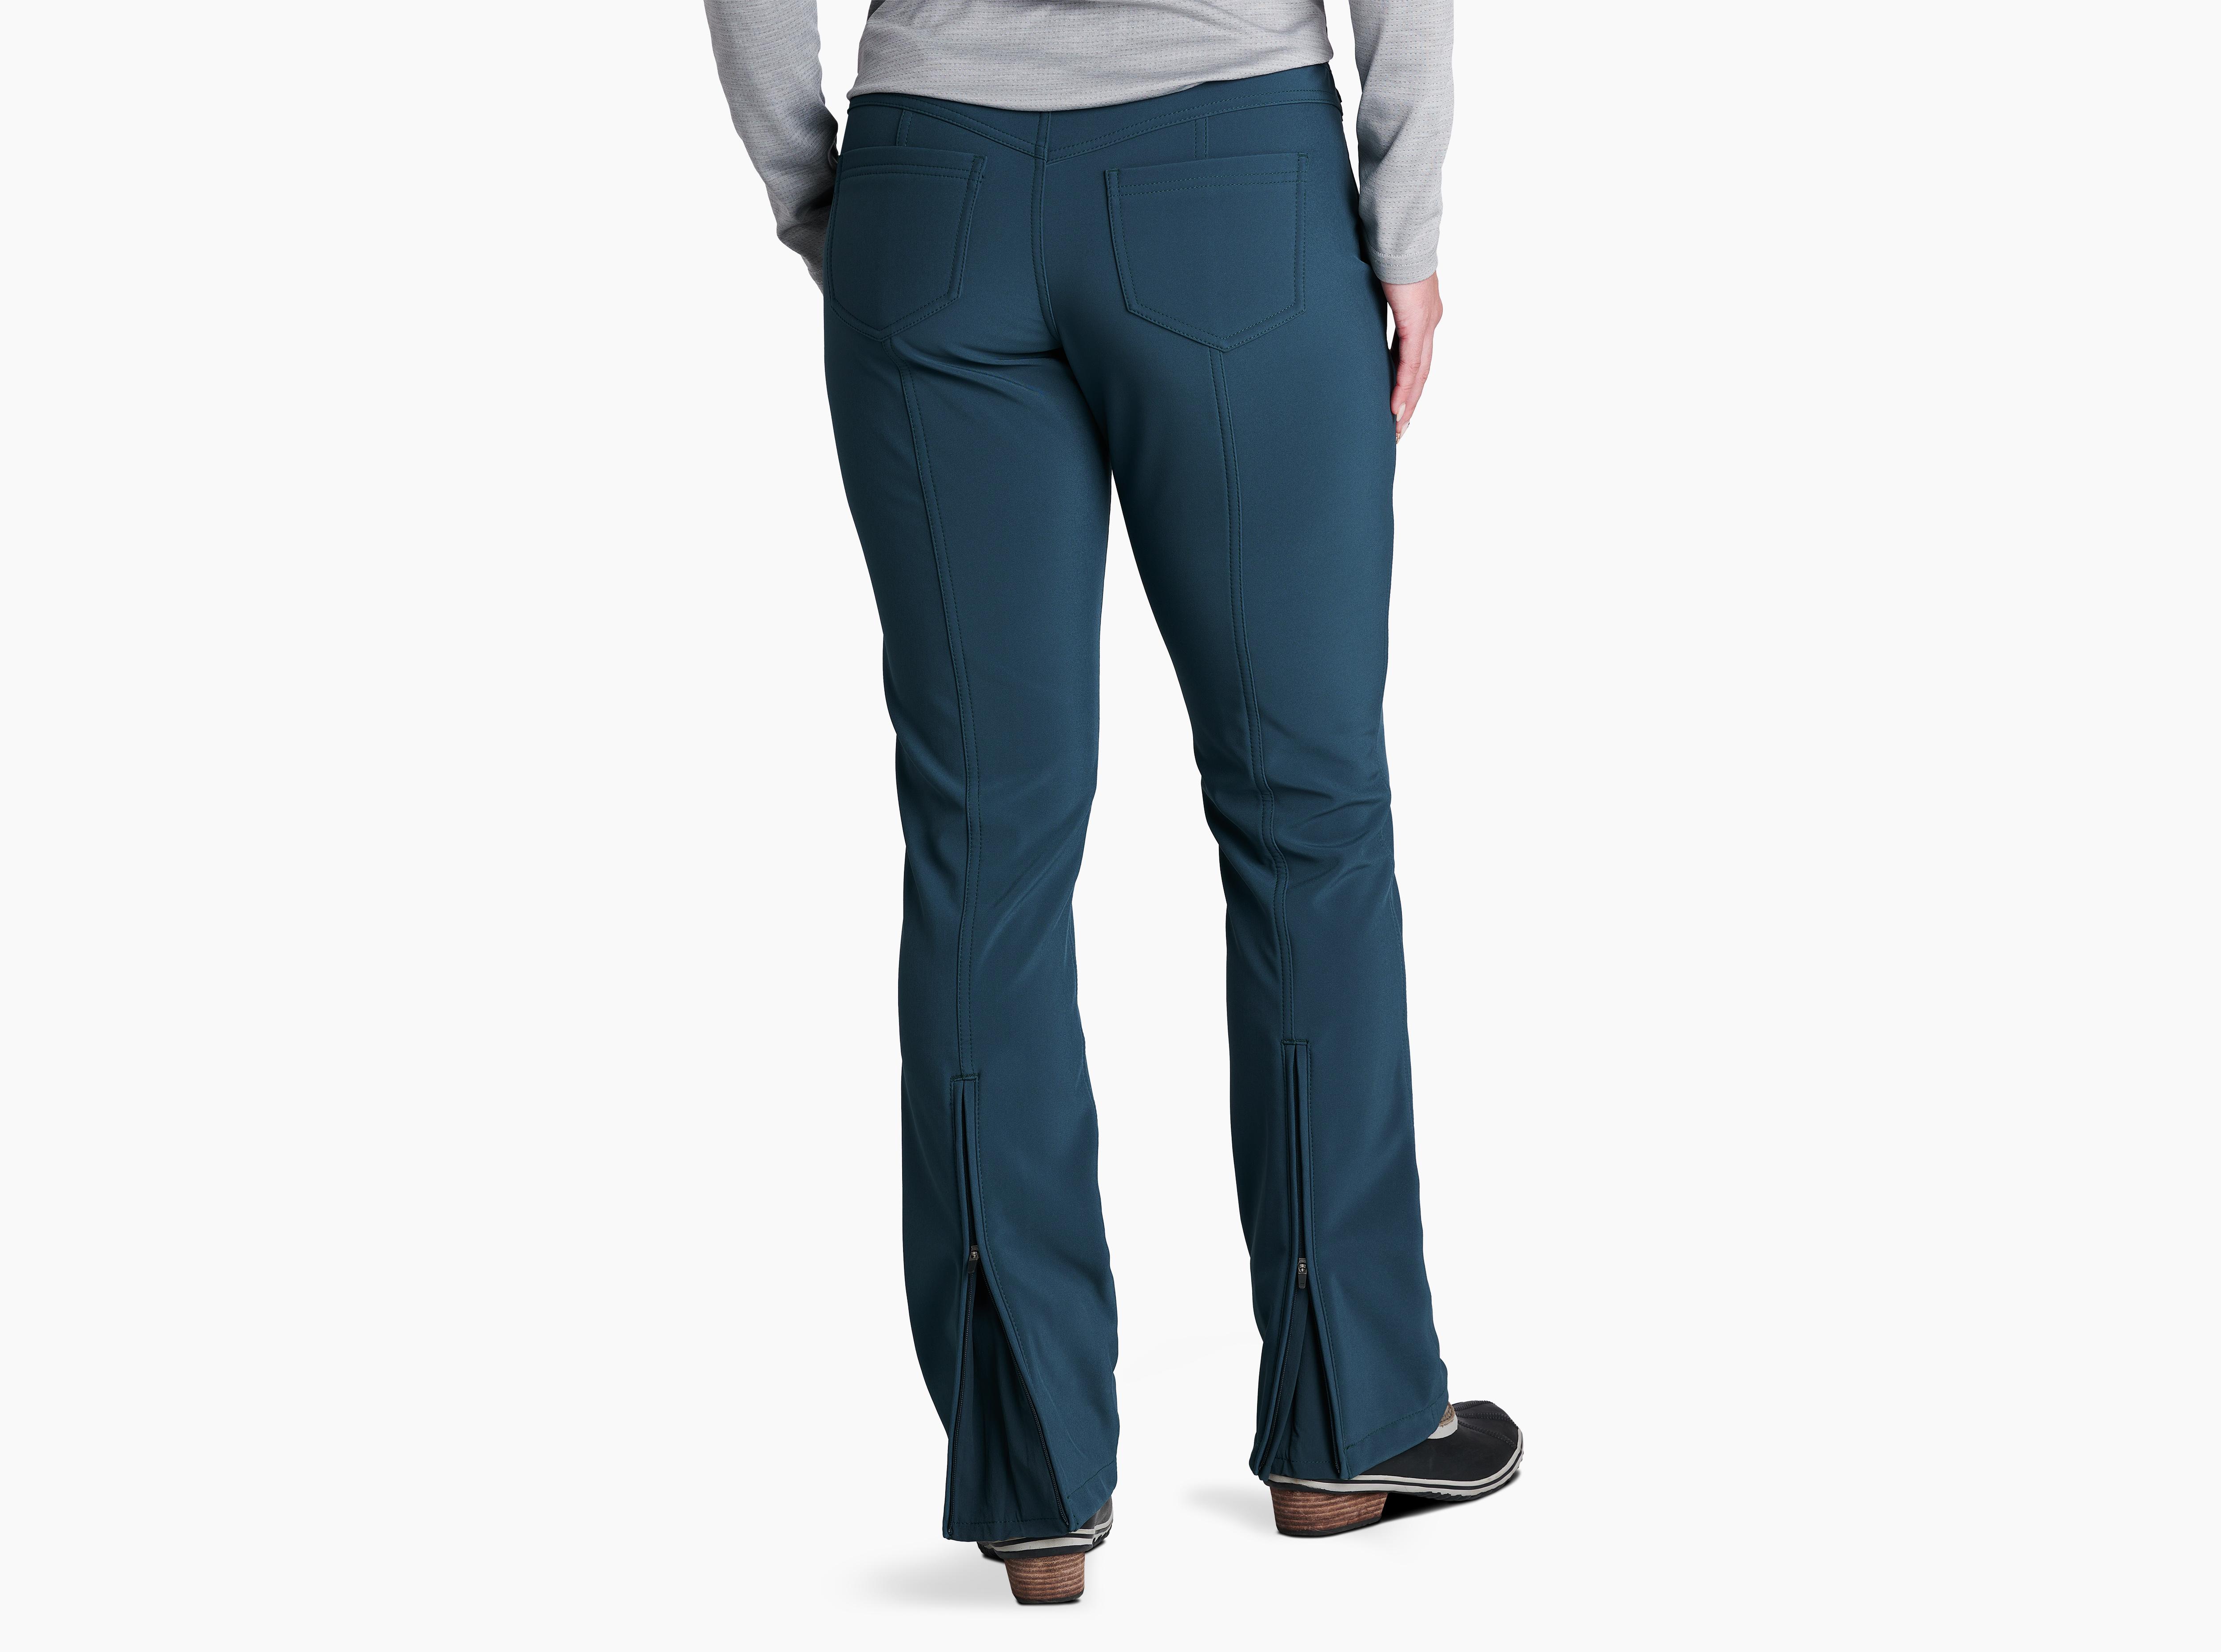 Frost™ Softshell Pant in Women's Pants